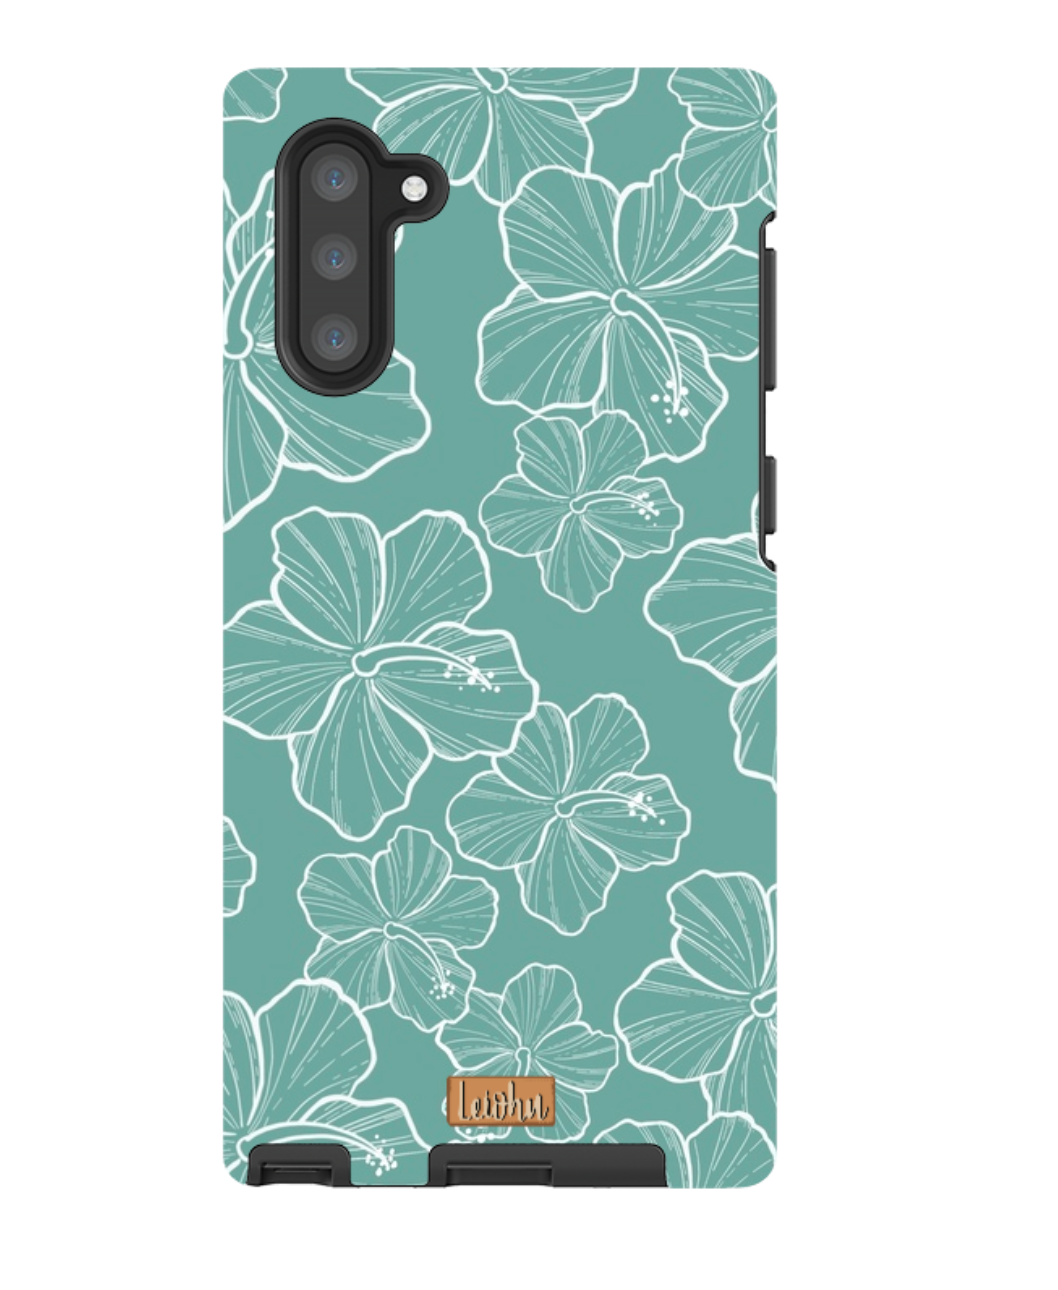 Hibiscus - Teal - Samsung Note